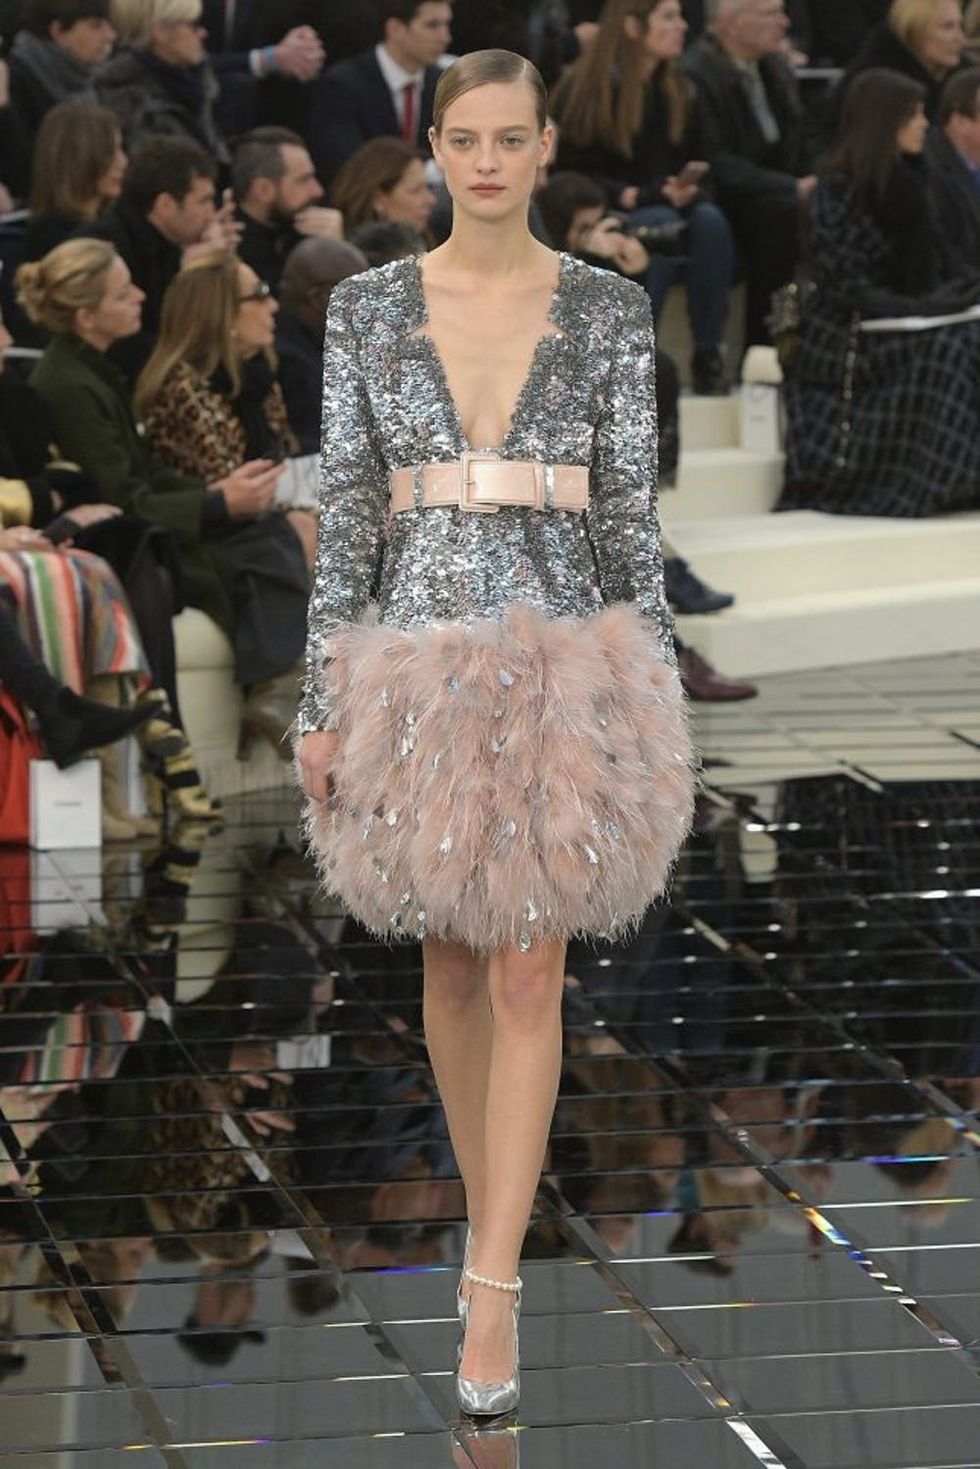 Chanel’s 2017 Spring Couture Collection Was Inspired by a… Spoon ...